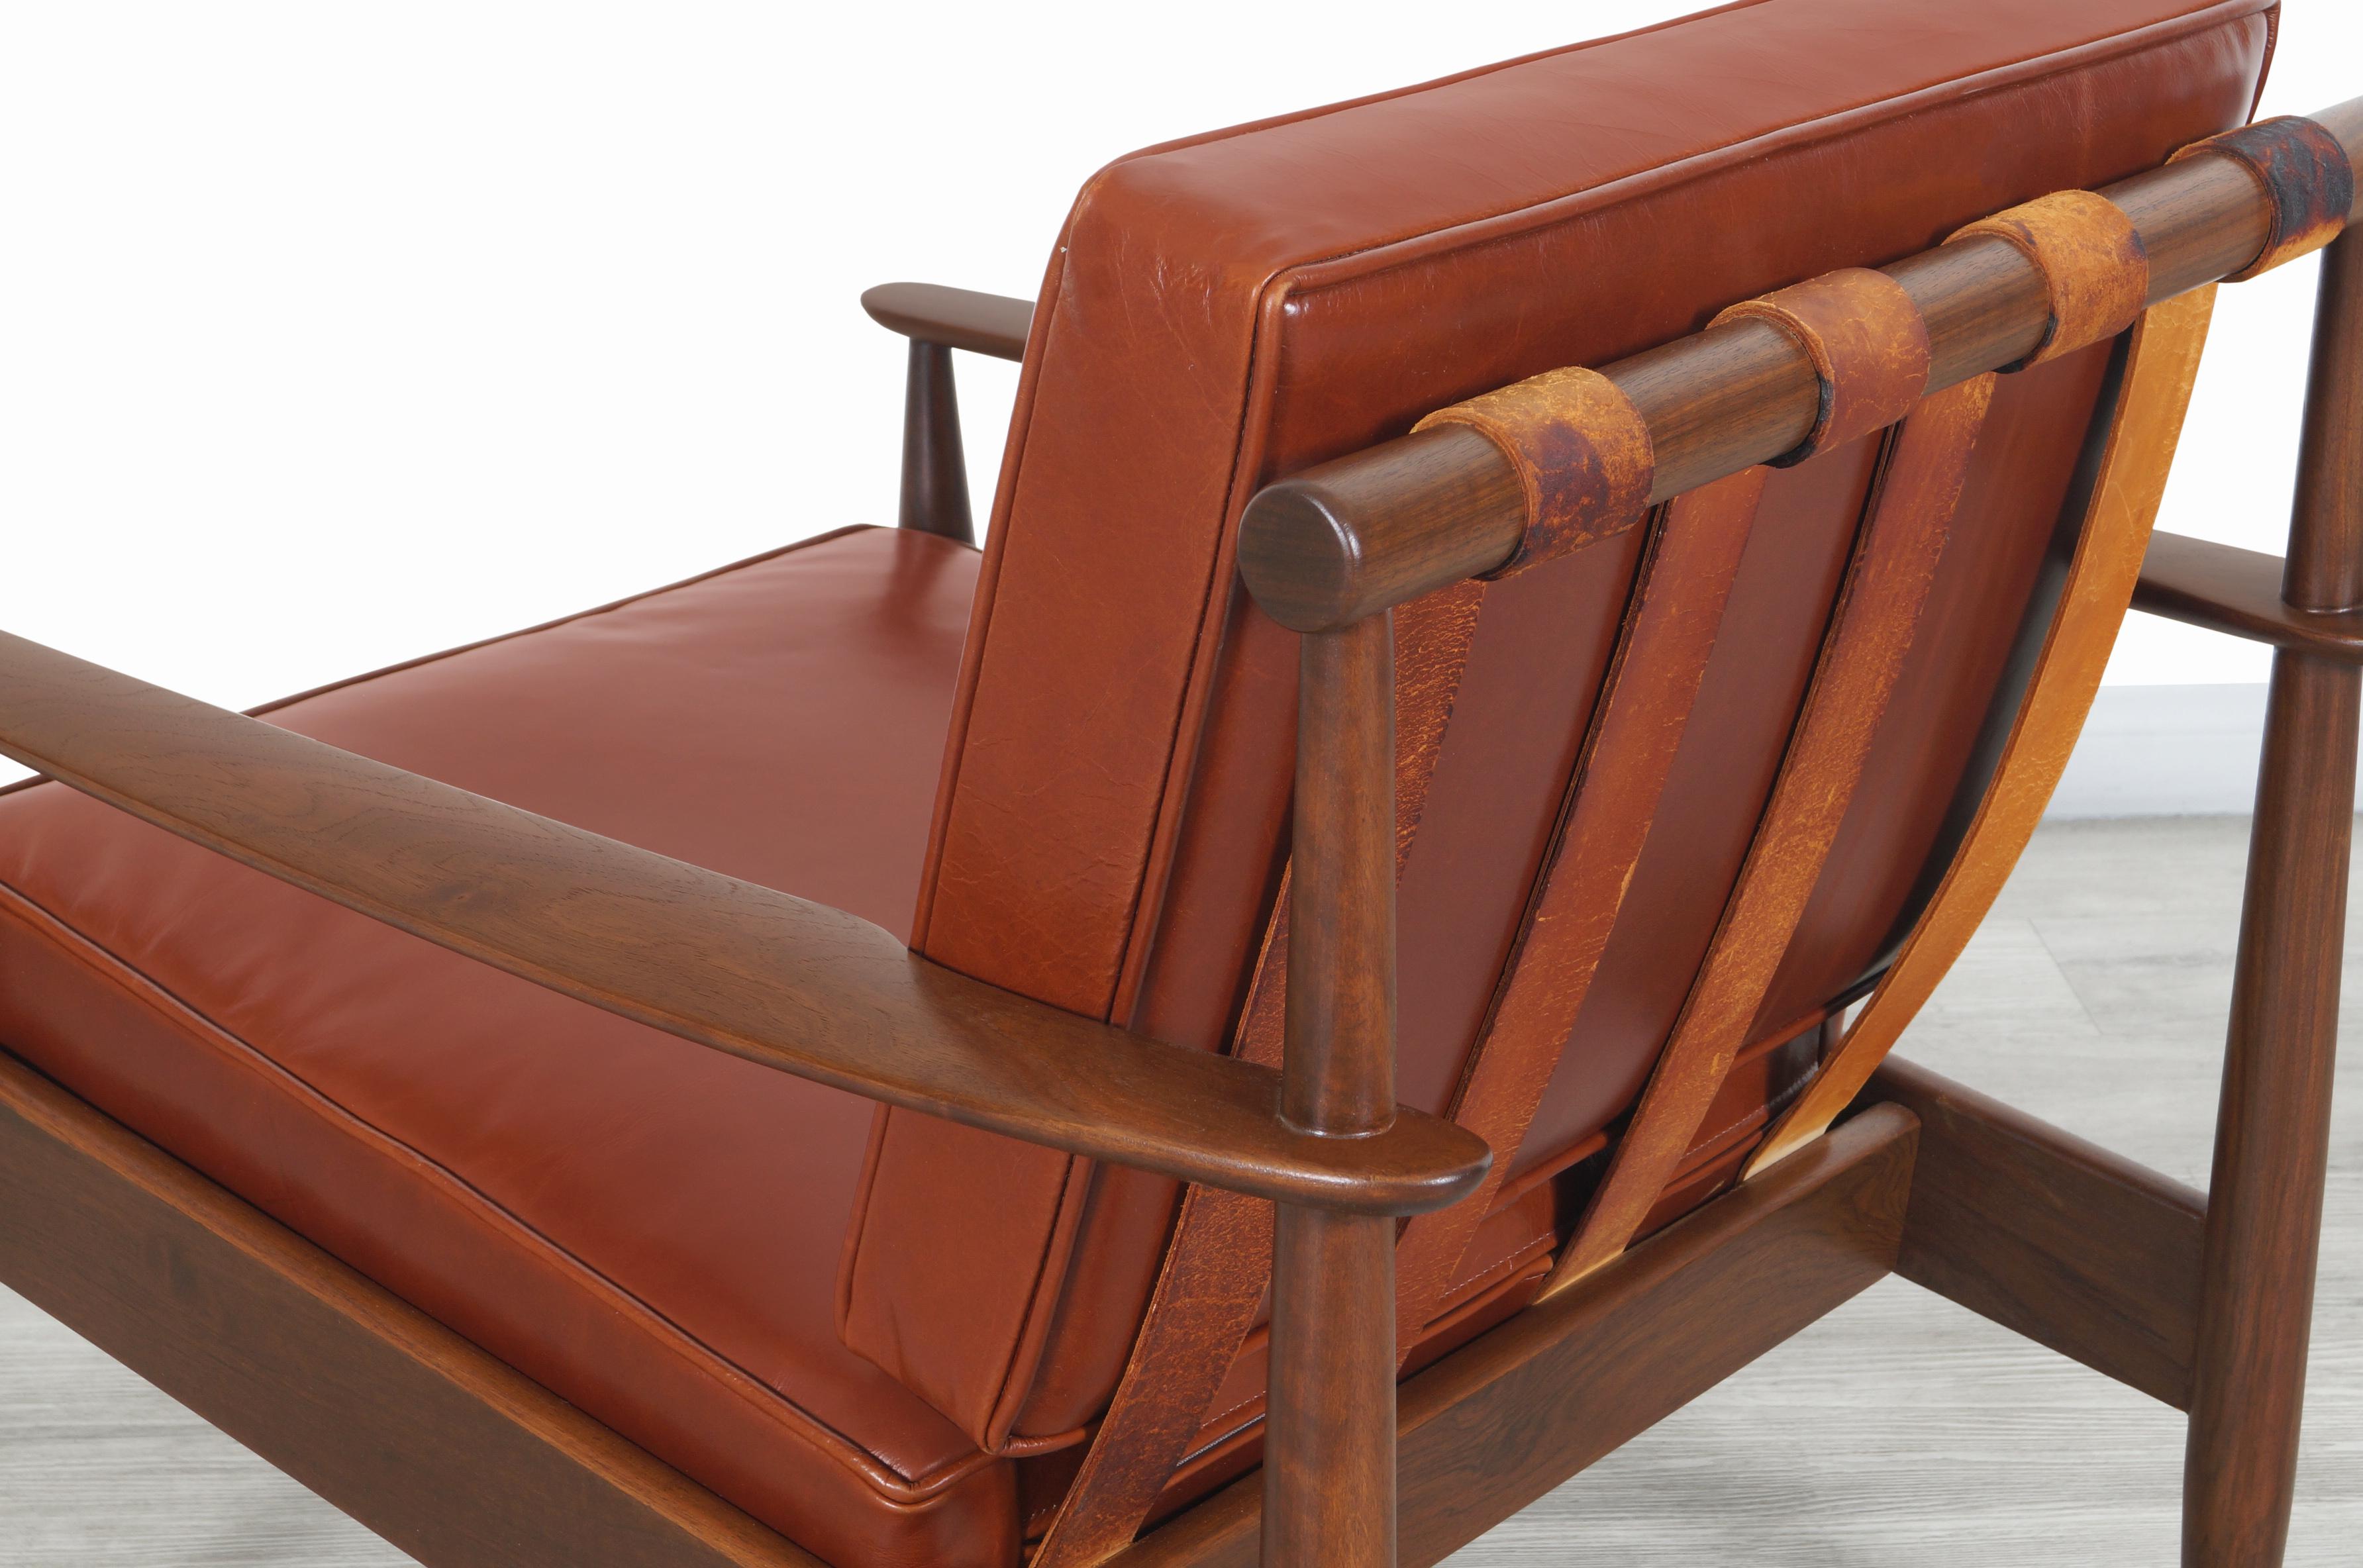 Mid-20th Century Danish Modern Leather and Walnut Lounge Chairs by Hans C. Andersen For Sale